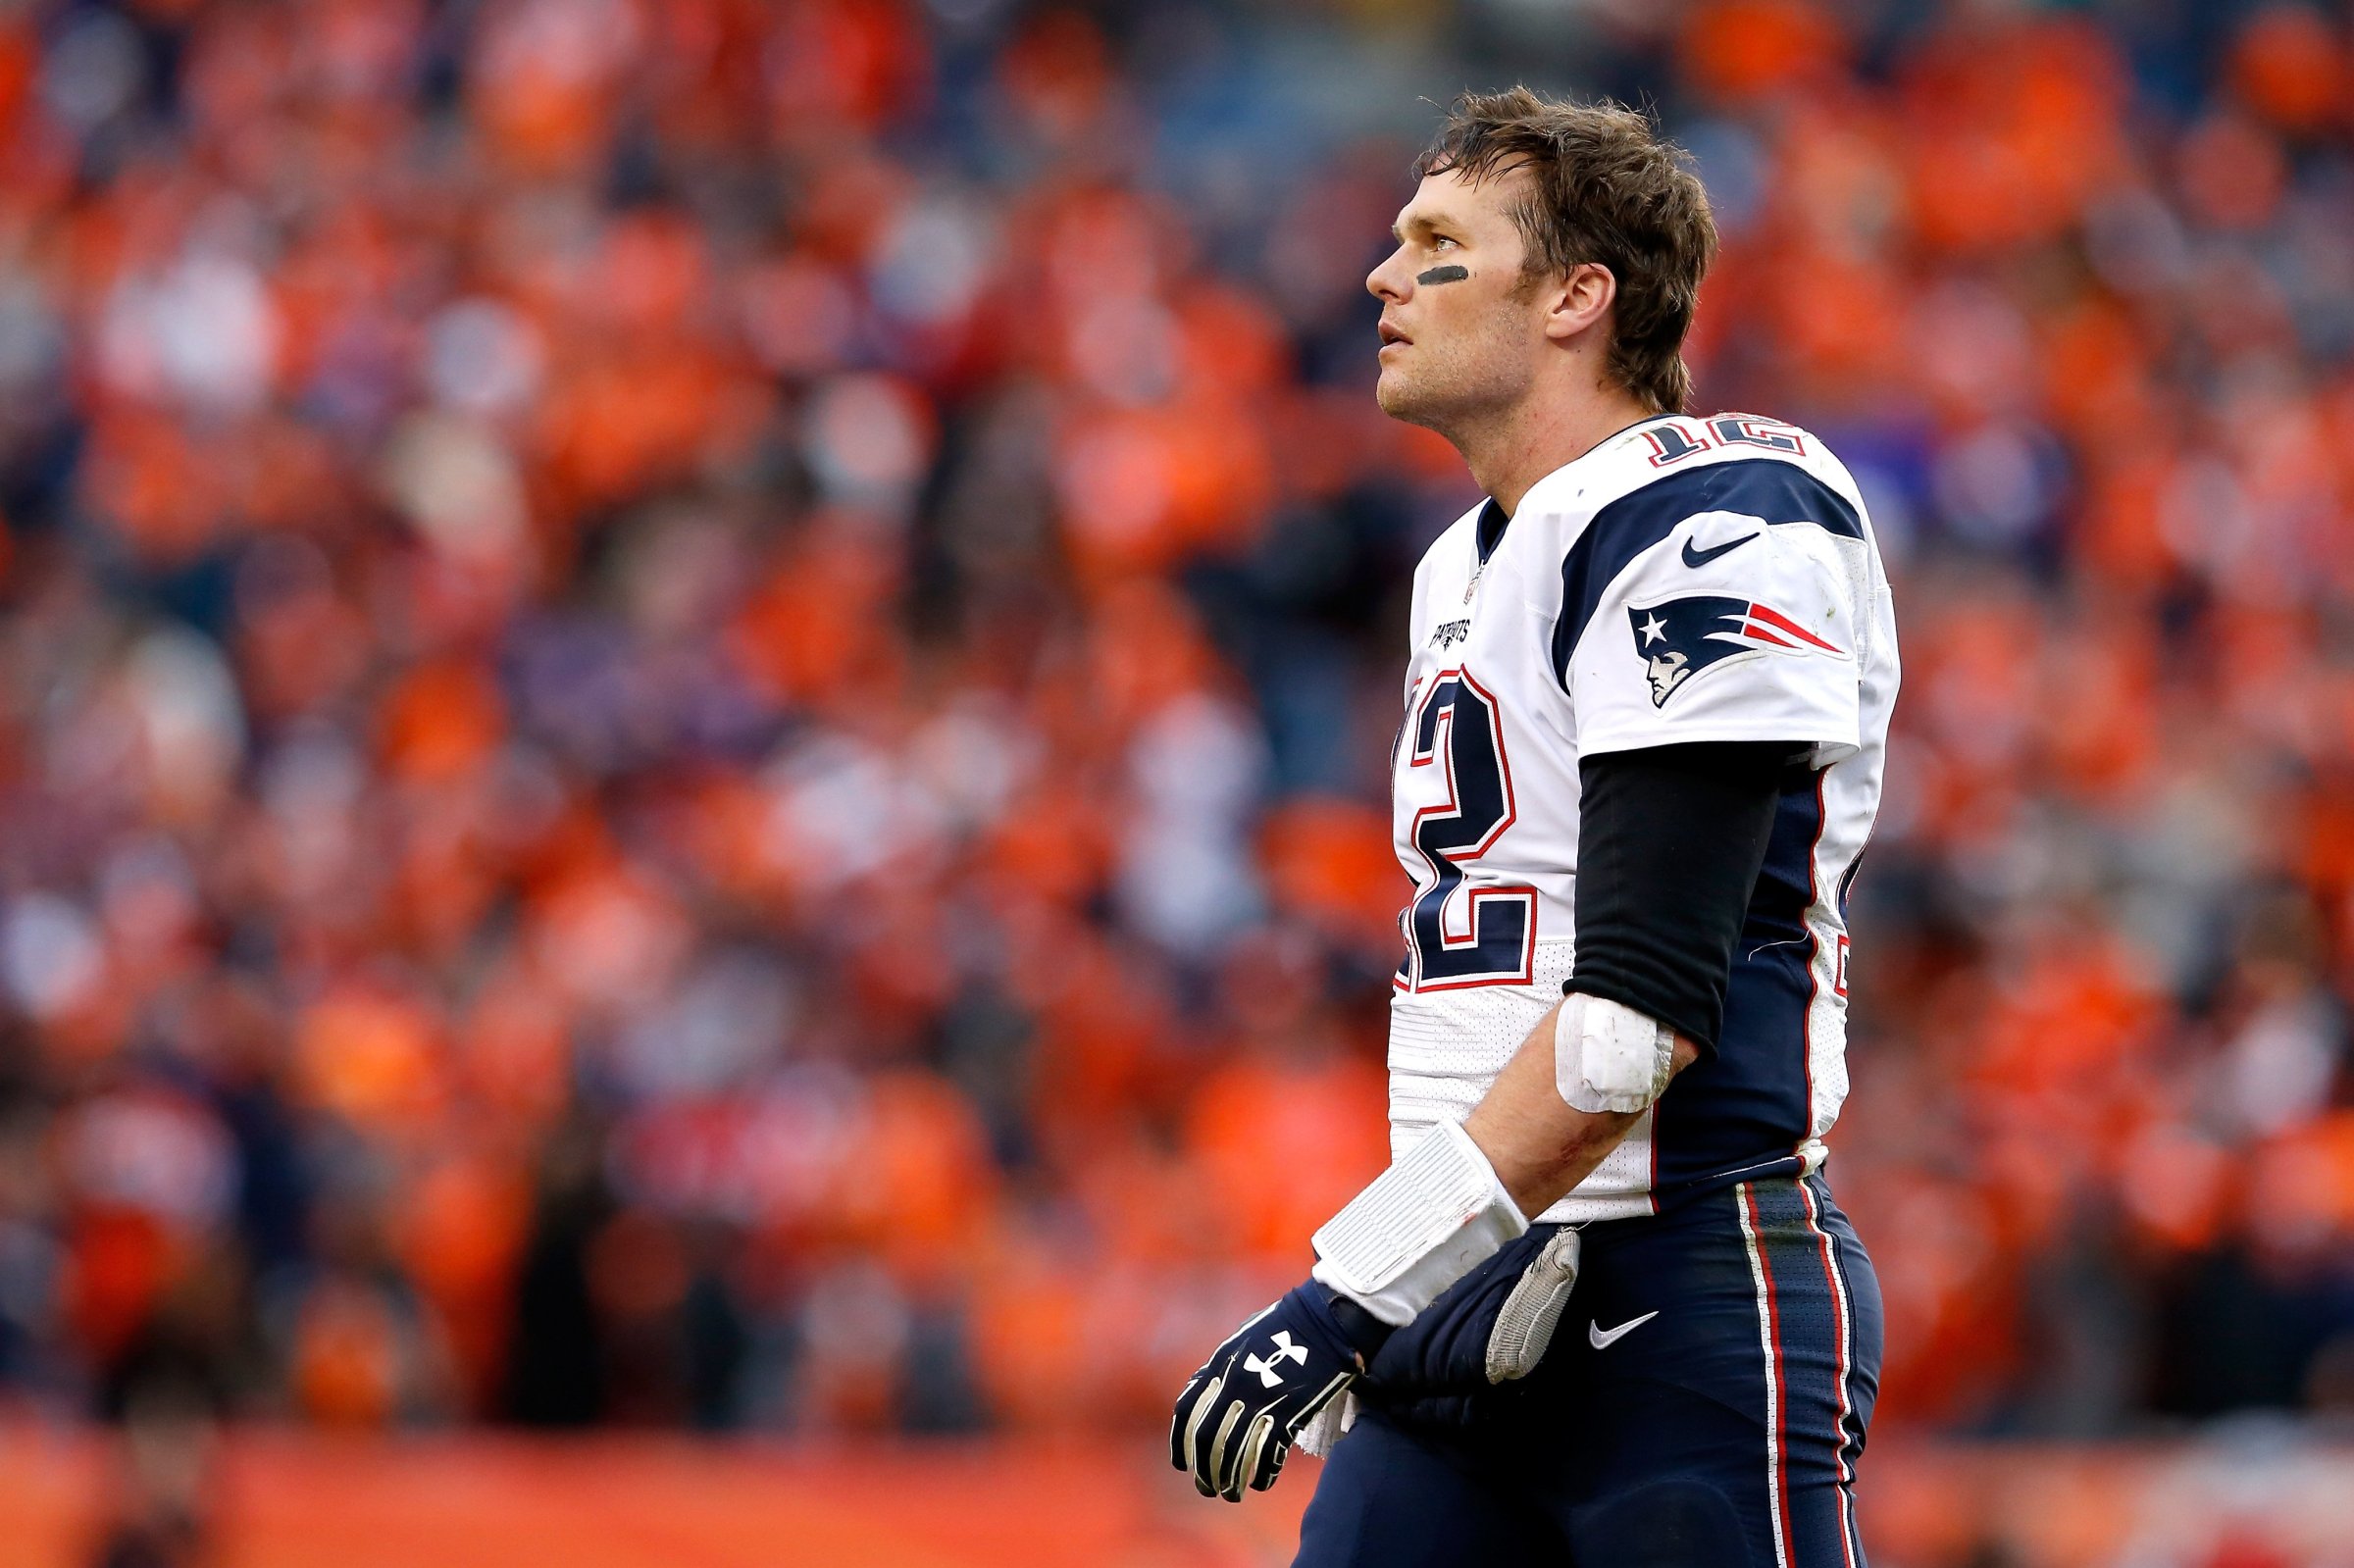 Tom Brady #12 of the New England Patriots walks off the field in the fourth quarter against the Denver Broncos in the AFC Championship game at Sports Authority Field at Mile High in Denver on Jan. 24, 2016.